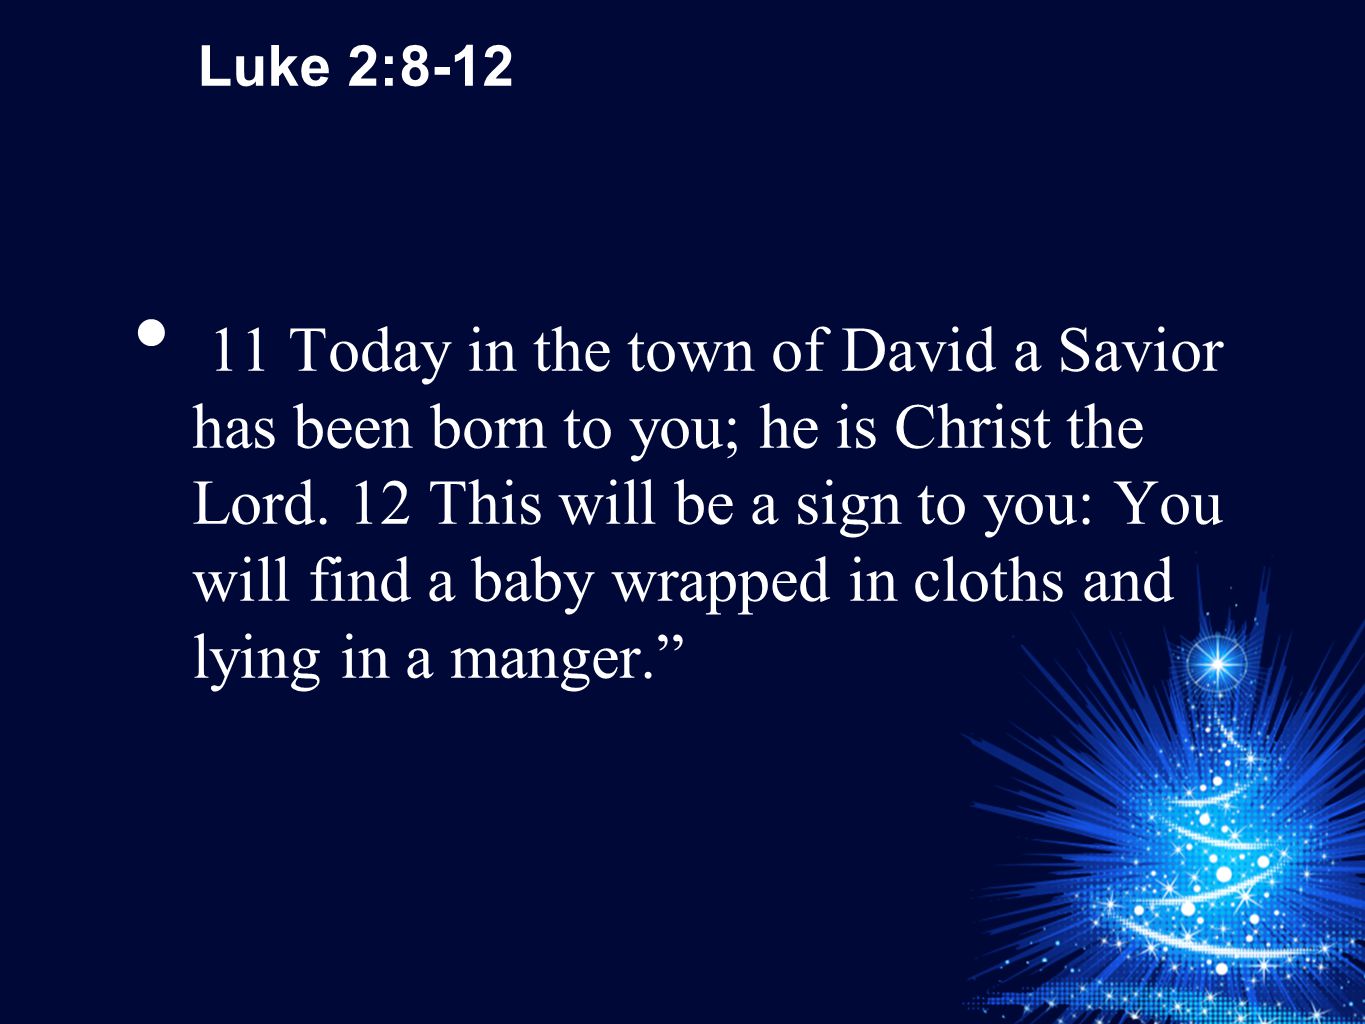 Luke 2: Today in the town of David a Savior has been born to you; he is Christ the Lord.